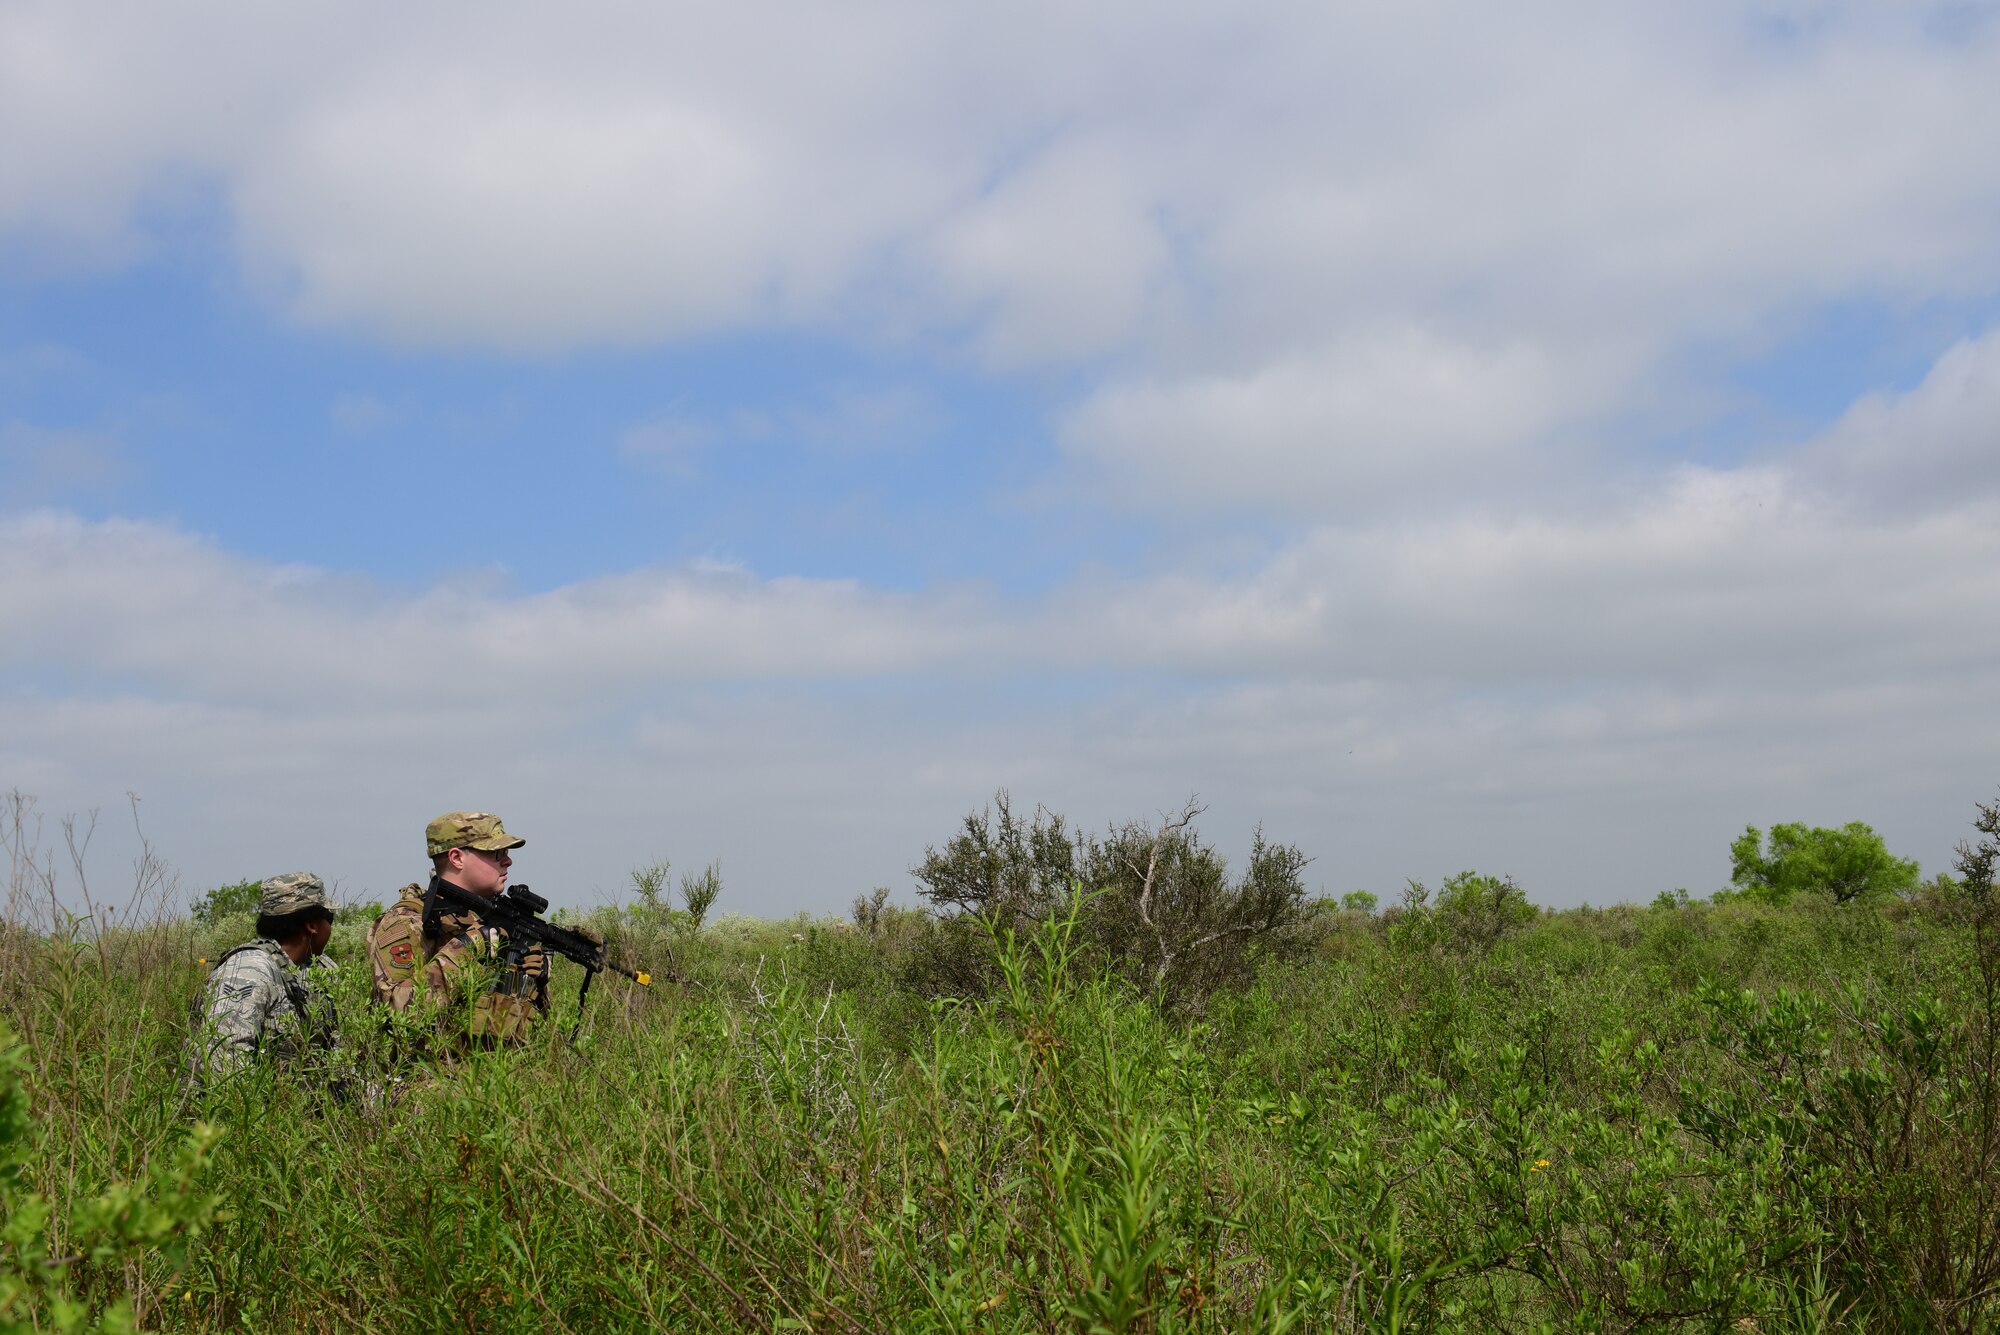 Airman 1st Class Colin Aranza and Senior Airman Samantha Hall, 47th Security Forces Squadron partolmen, keep a watchful eye on their surroundings during an exercise at Laughlin Air Force Base, Texas, April 17, 2019. The 47th SFS changed up the tempo with an exercise that challenged their tactics, teamwork and physical fitness as they were put head to head with a simulated opposing force. (U.S. Air Force photo by Senior Airman Benjamin N. Valmoja)